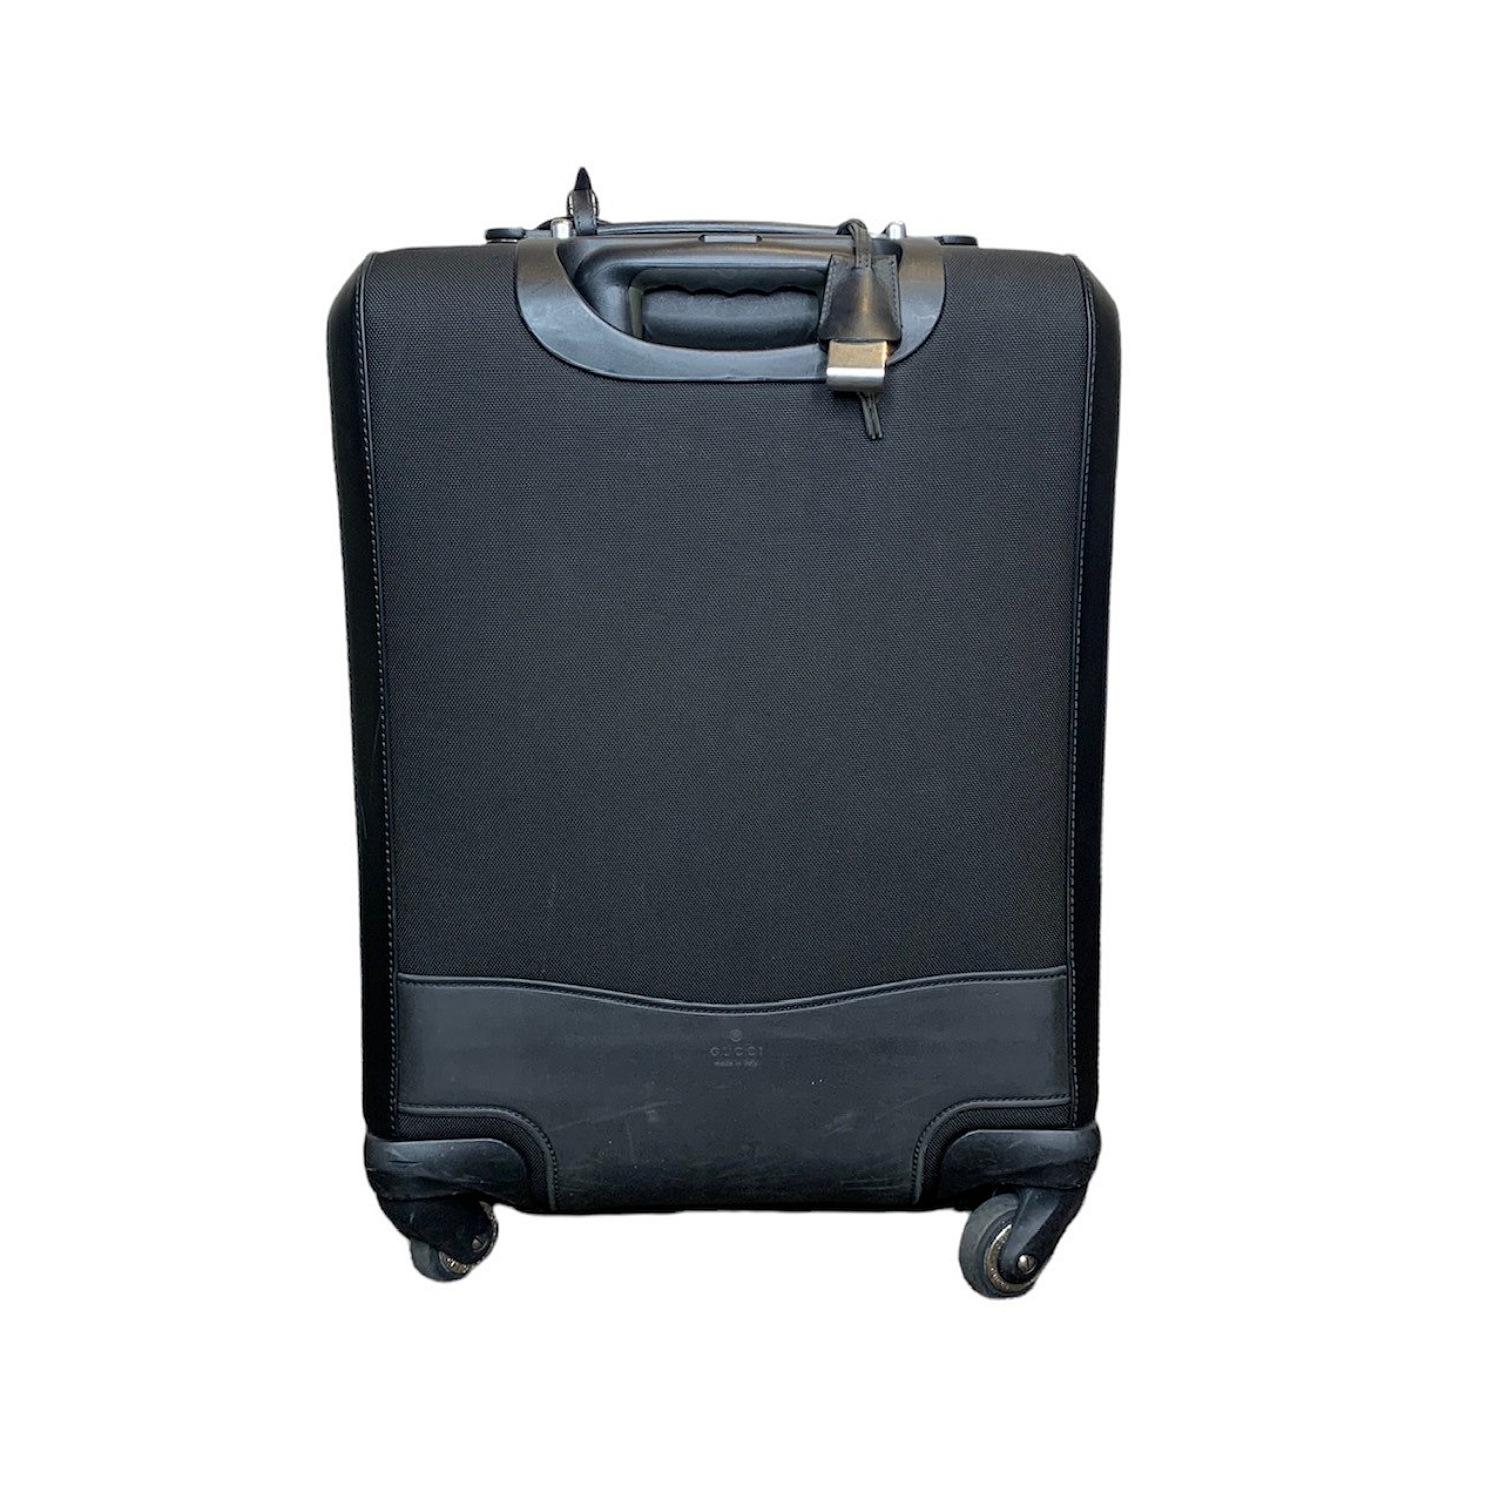 Wheeled carry-on in a techno fabric with red and green web detail.

Designer: Gucci
Material: Black techno fabric with black leather detail
Origin: Italy
Date/Authenticity Code: 368778.200047
Interior Lining: Black nylon
Measurements: 14.9